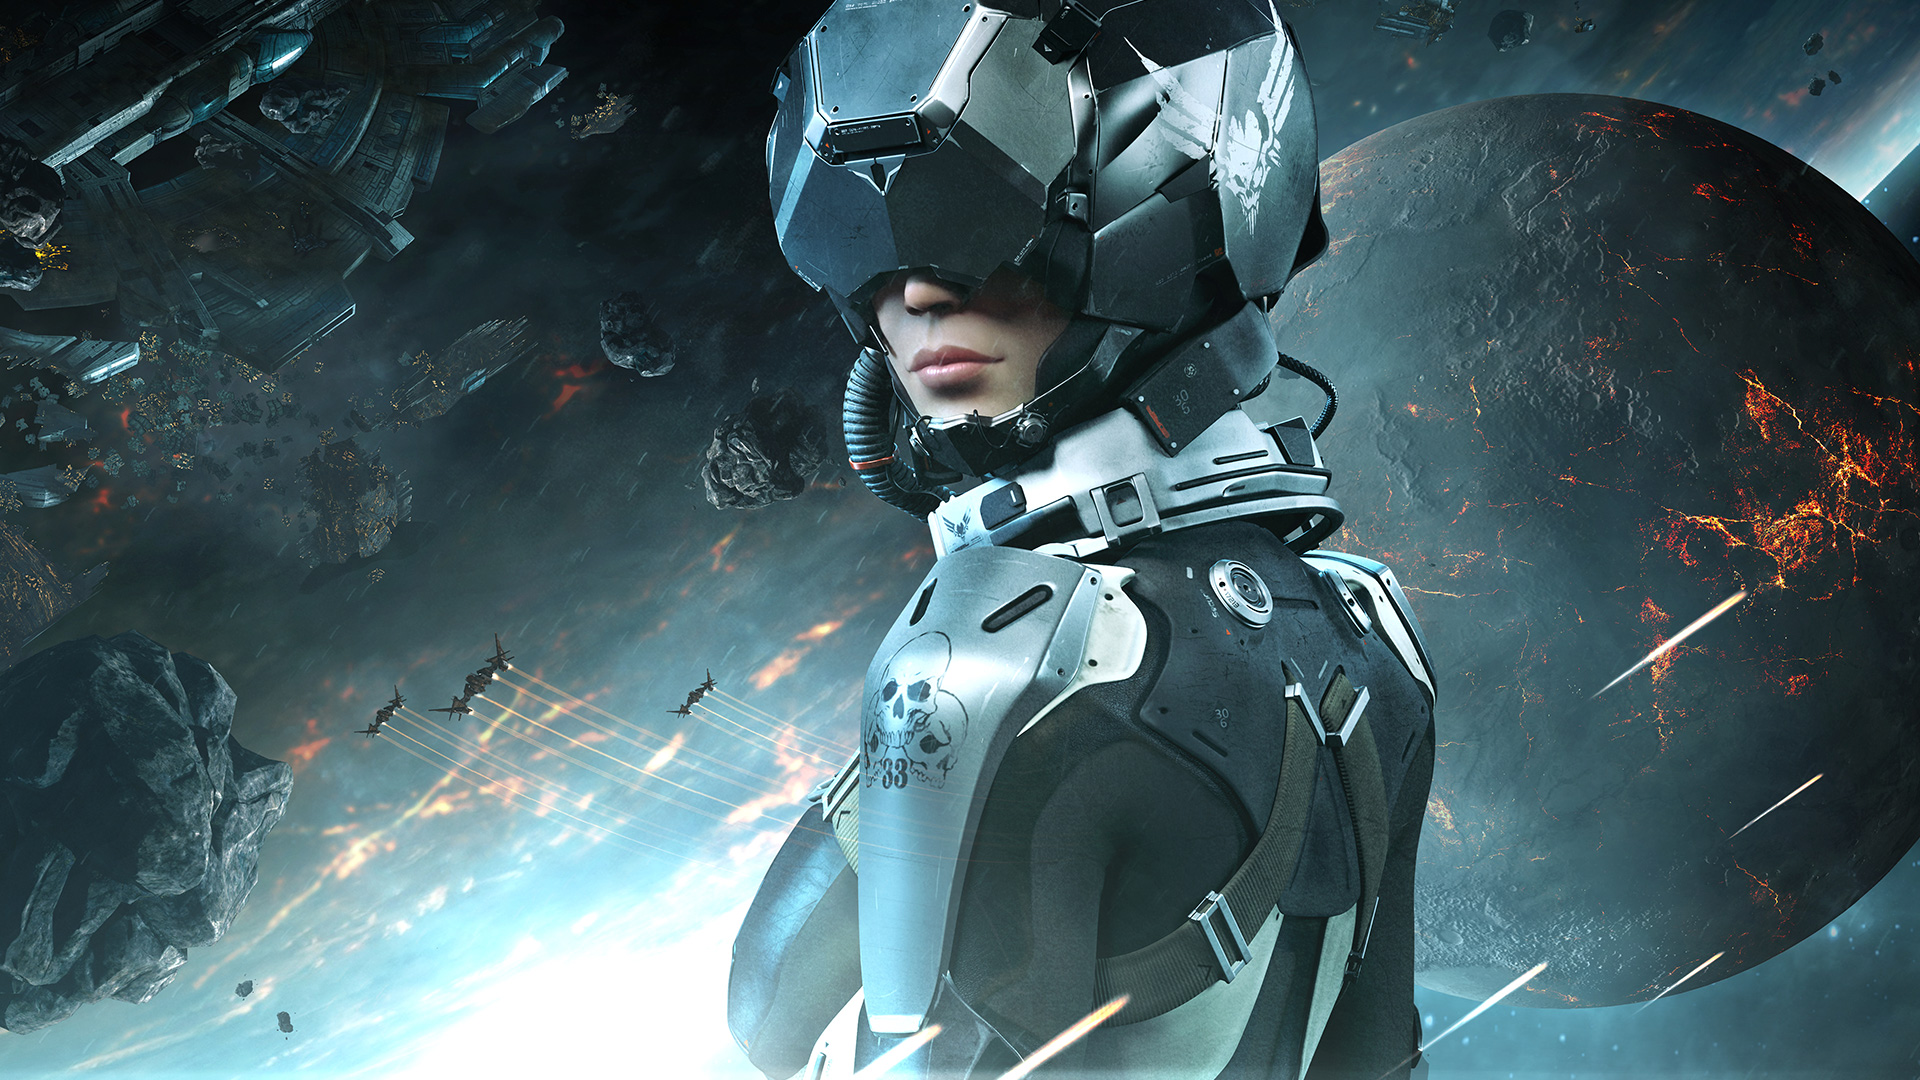 Video Game EVE: Valkyrie HD Wallpaper | Background Image